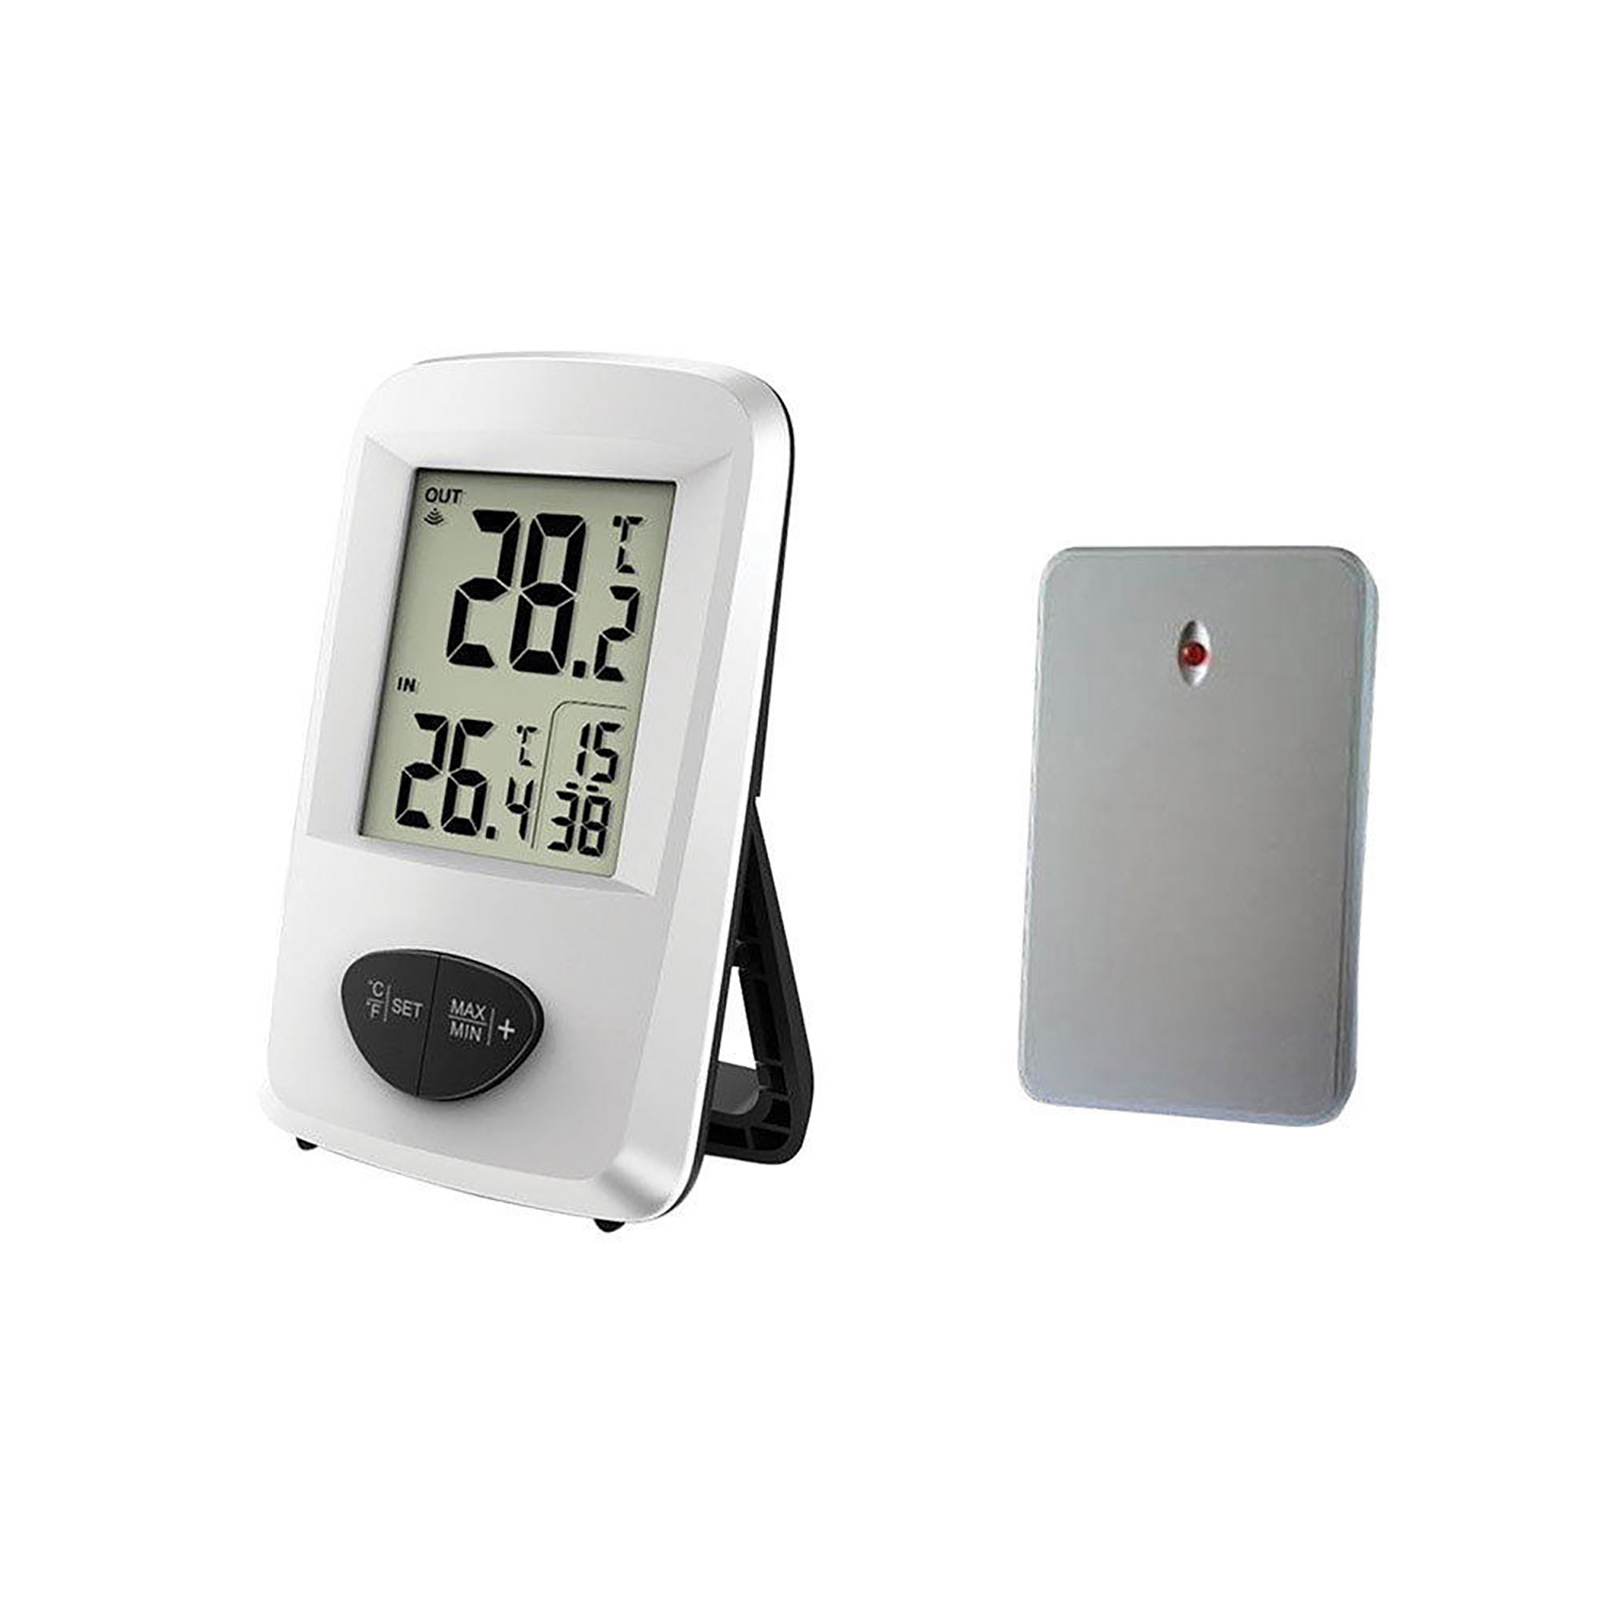 Taylor Wireless Digital Weather Station Thermometer - White